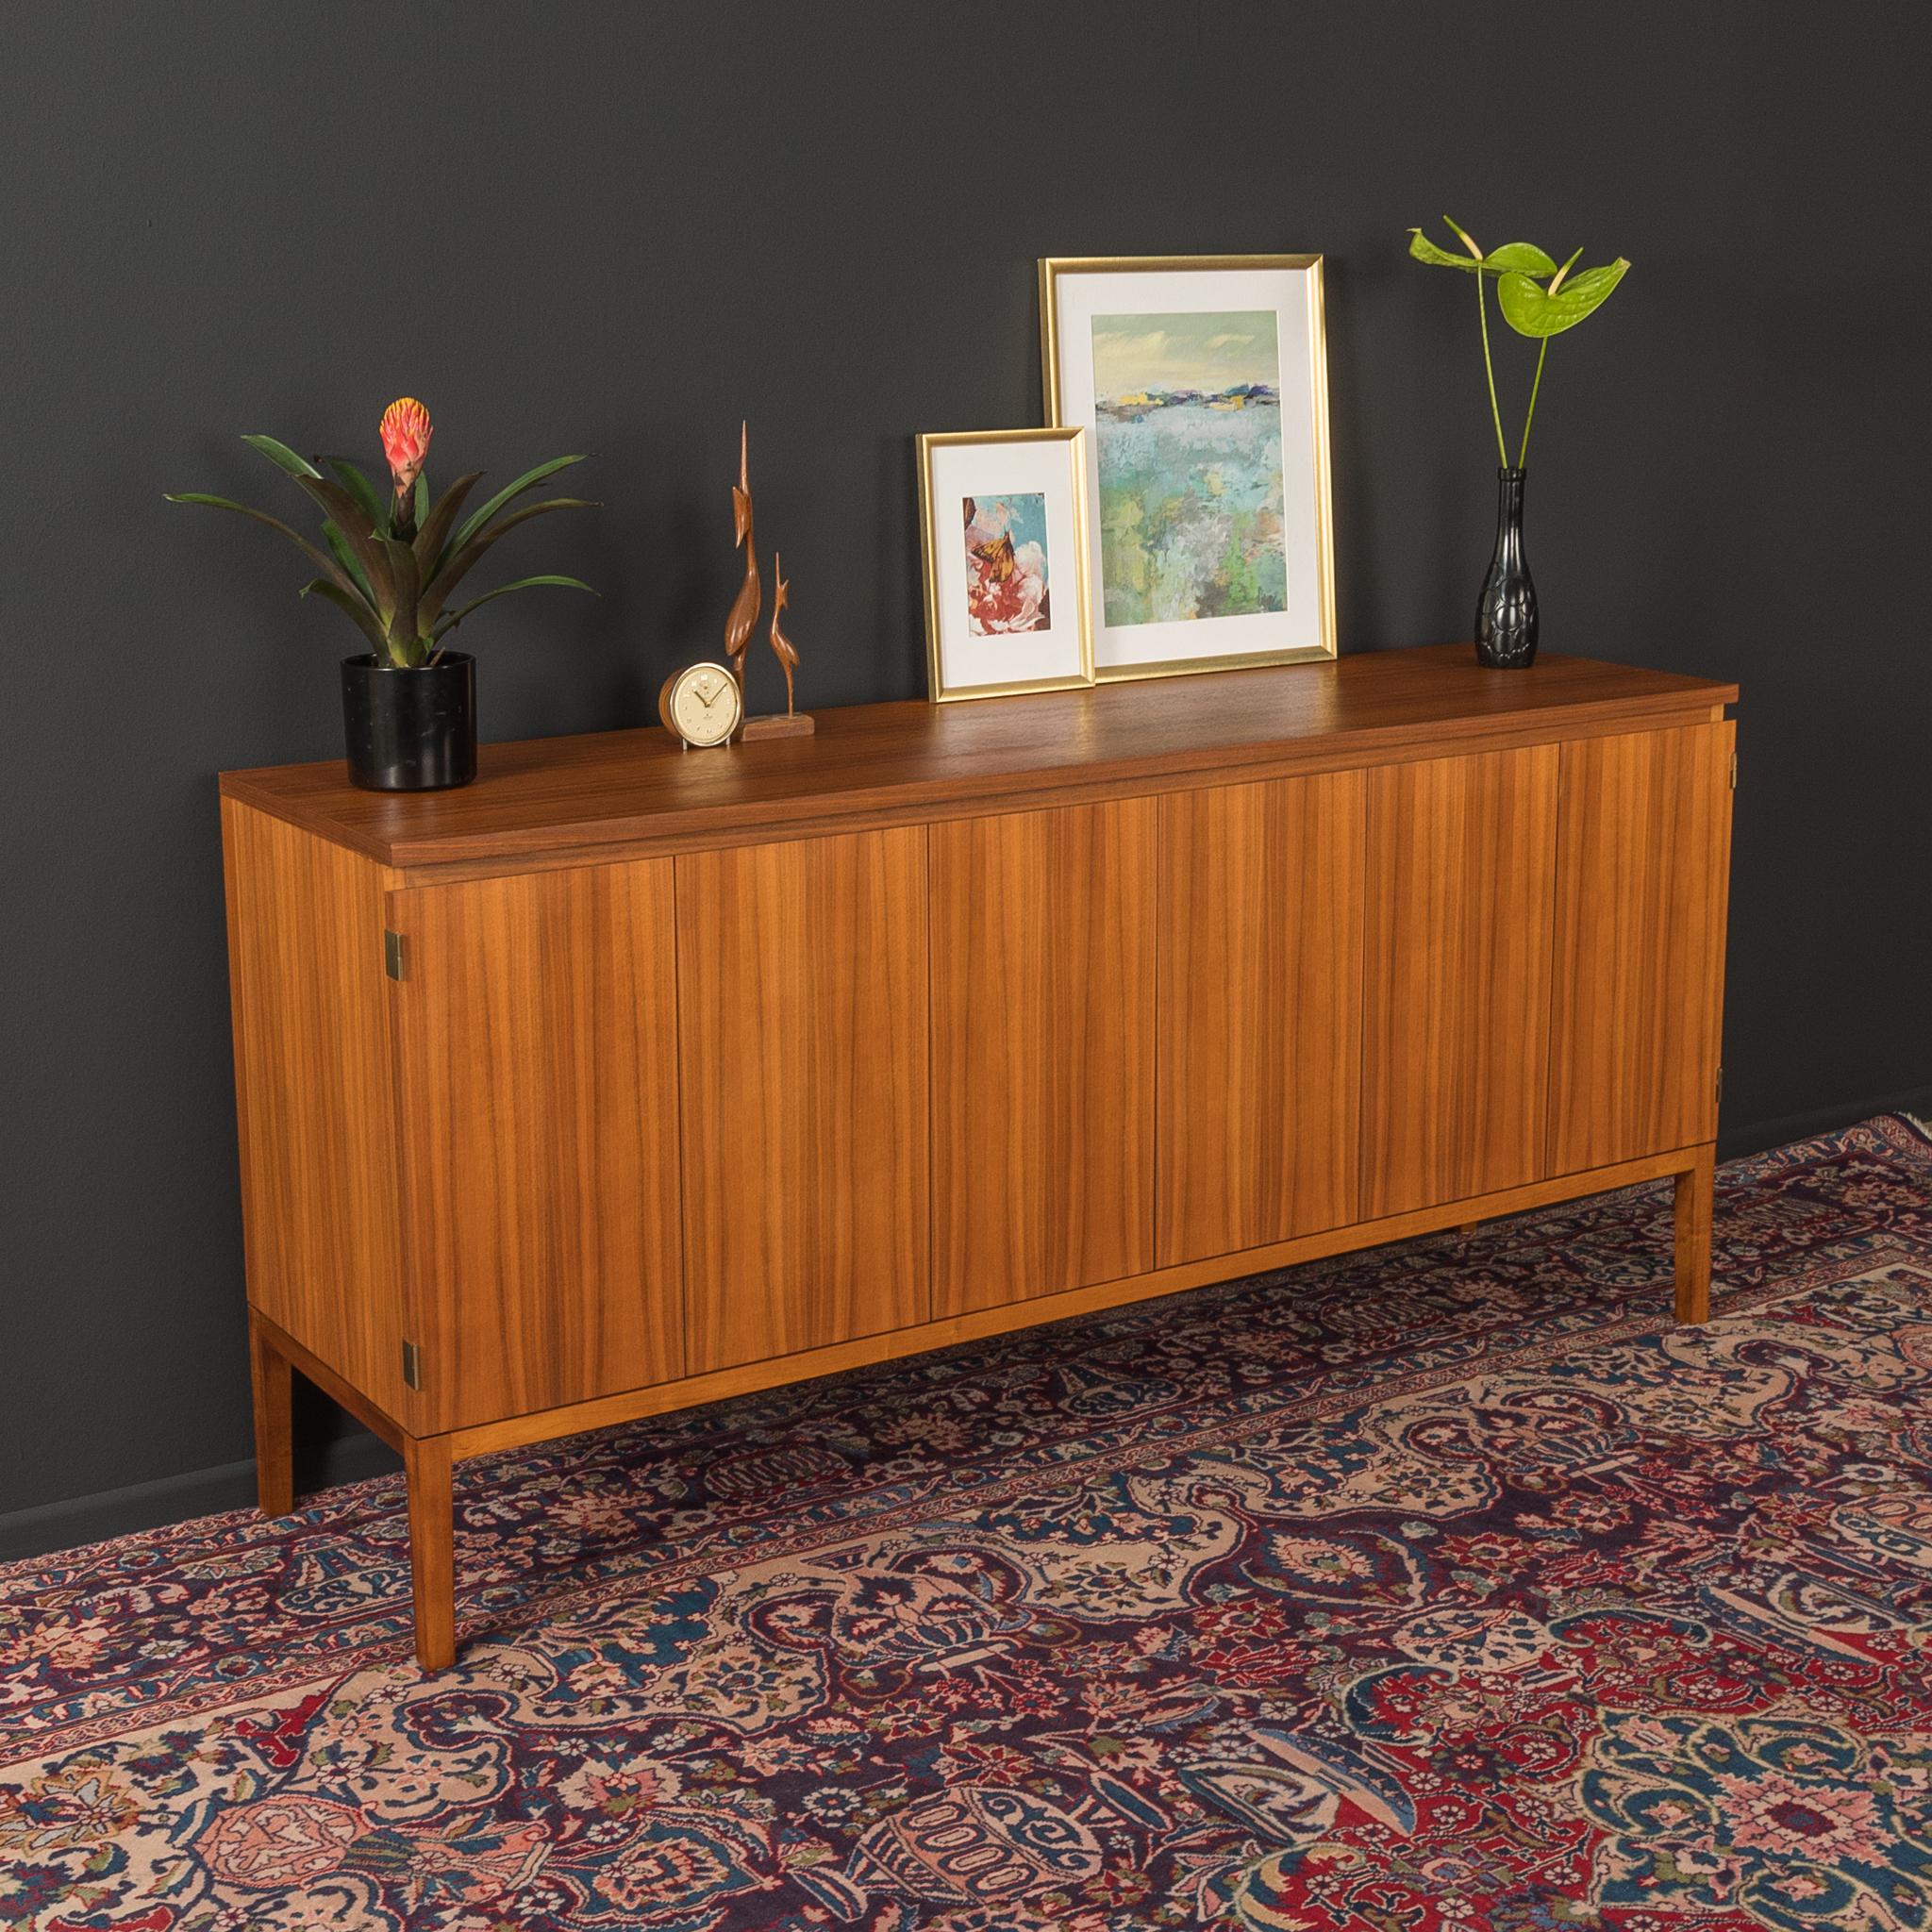 Mid-Century Modern Wk Möbel Sideboard from the 1950s Designed by Paul McCobb, Made in Germany